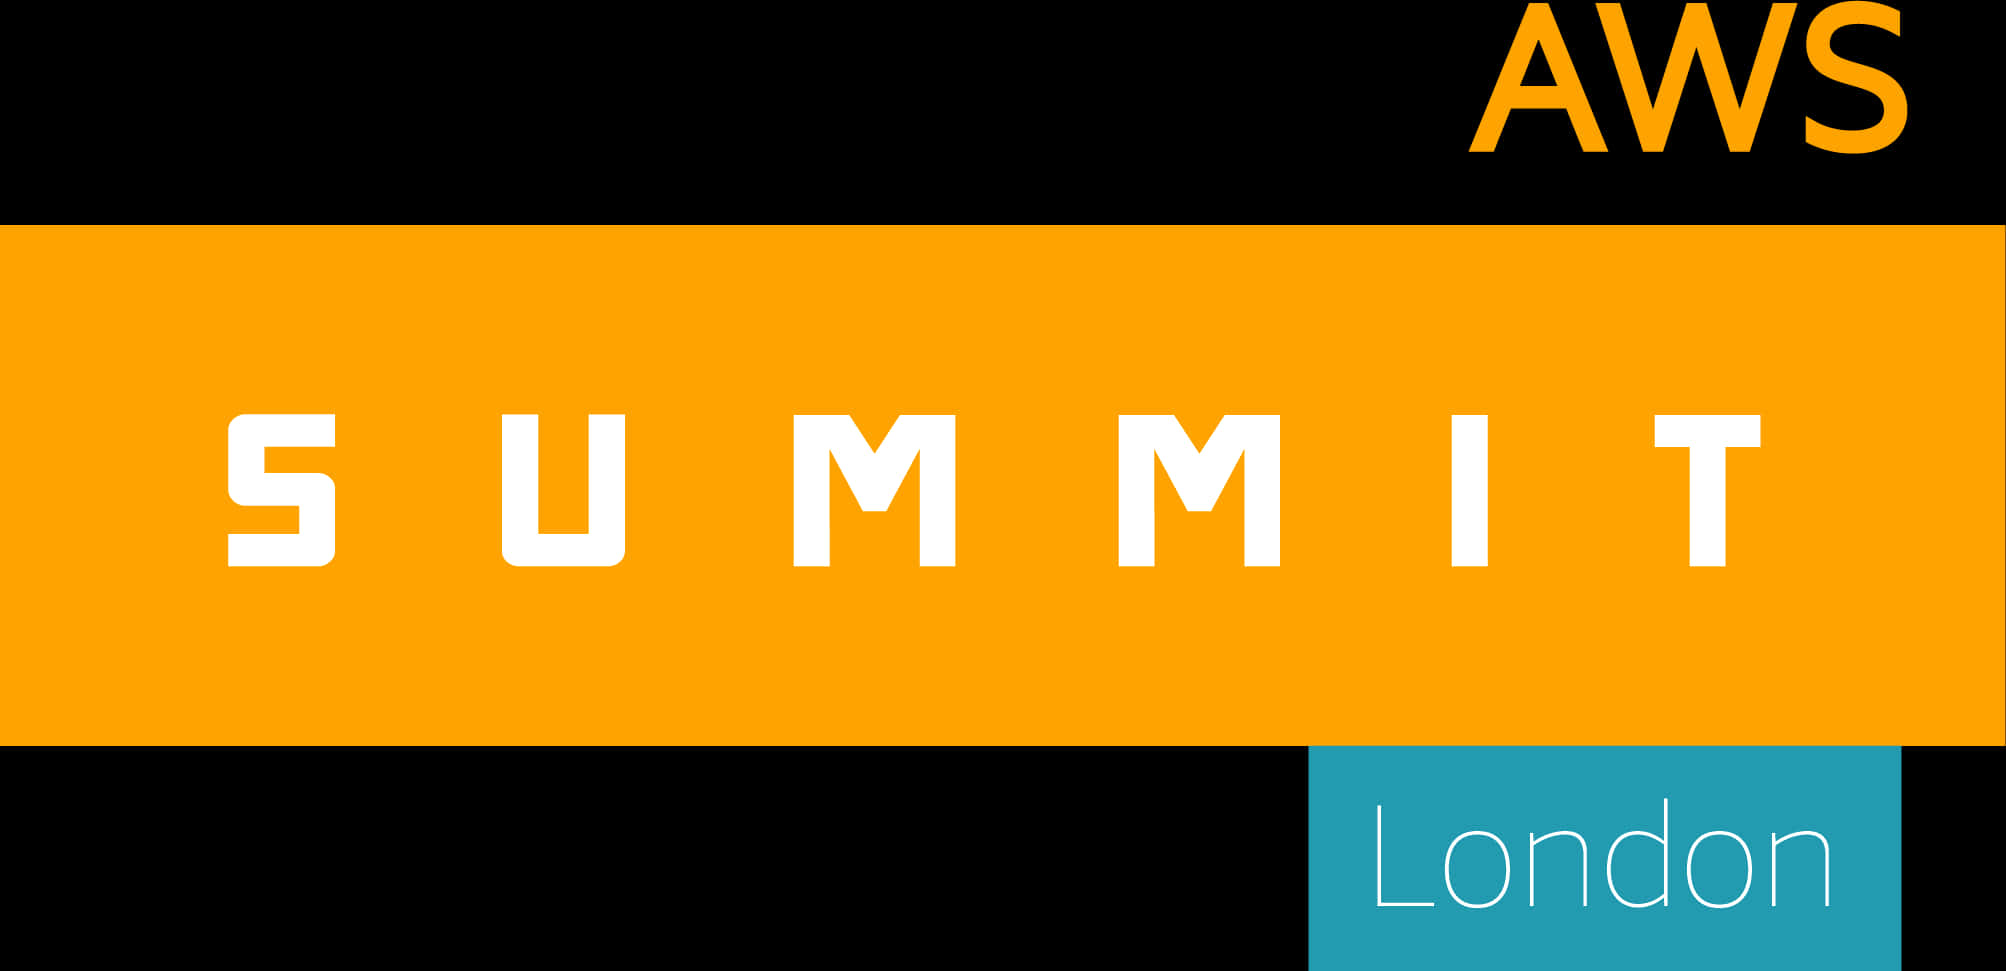 A W S Summit London Banner PNG